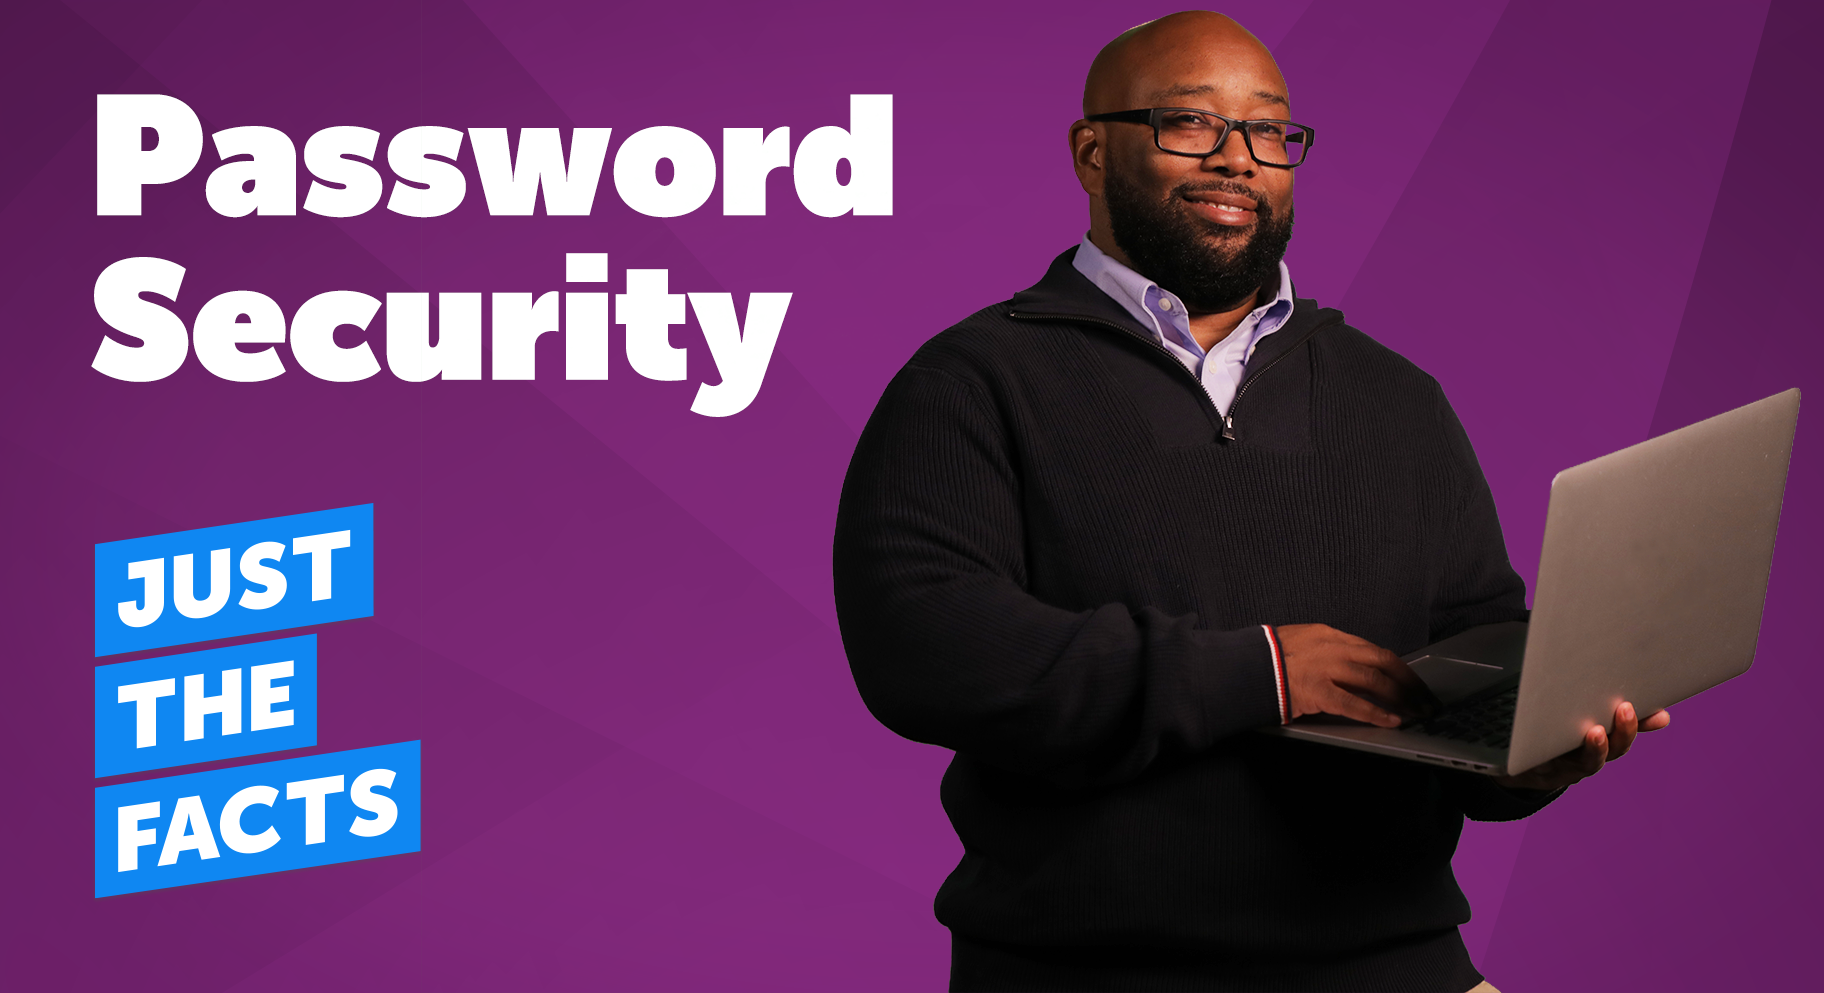 Just the Facts: Password Security